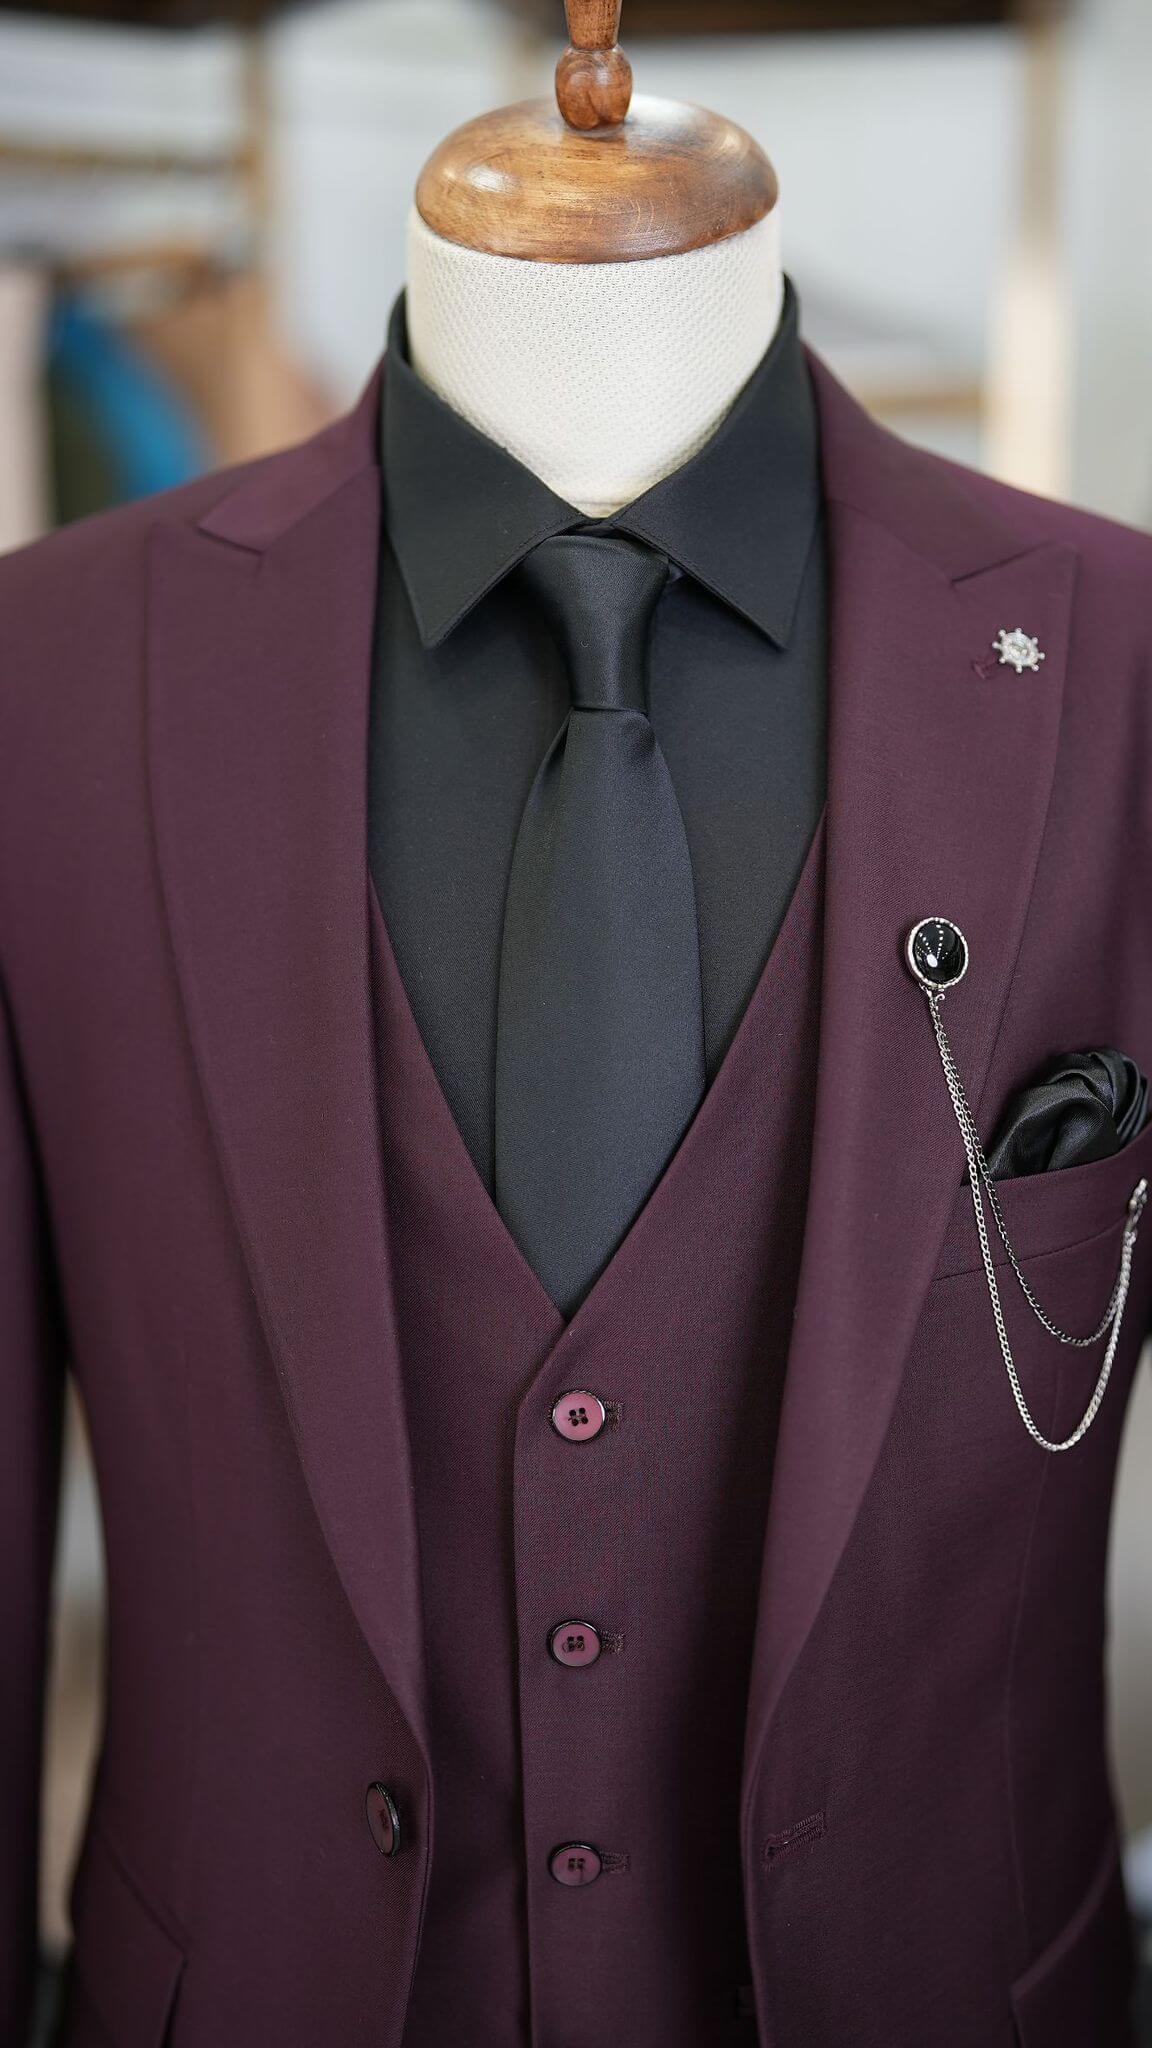 A Burgundy Suit on display.